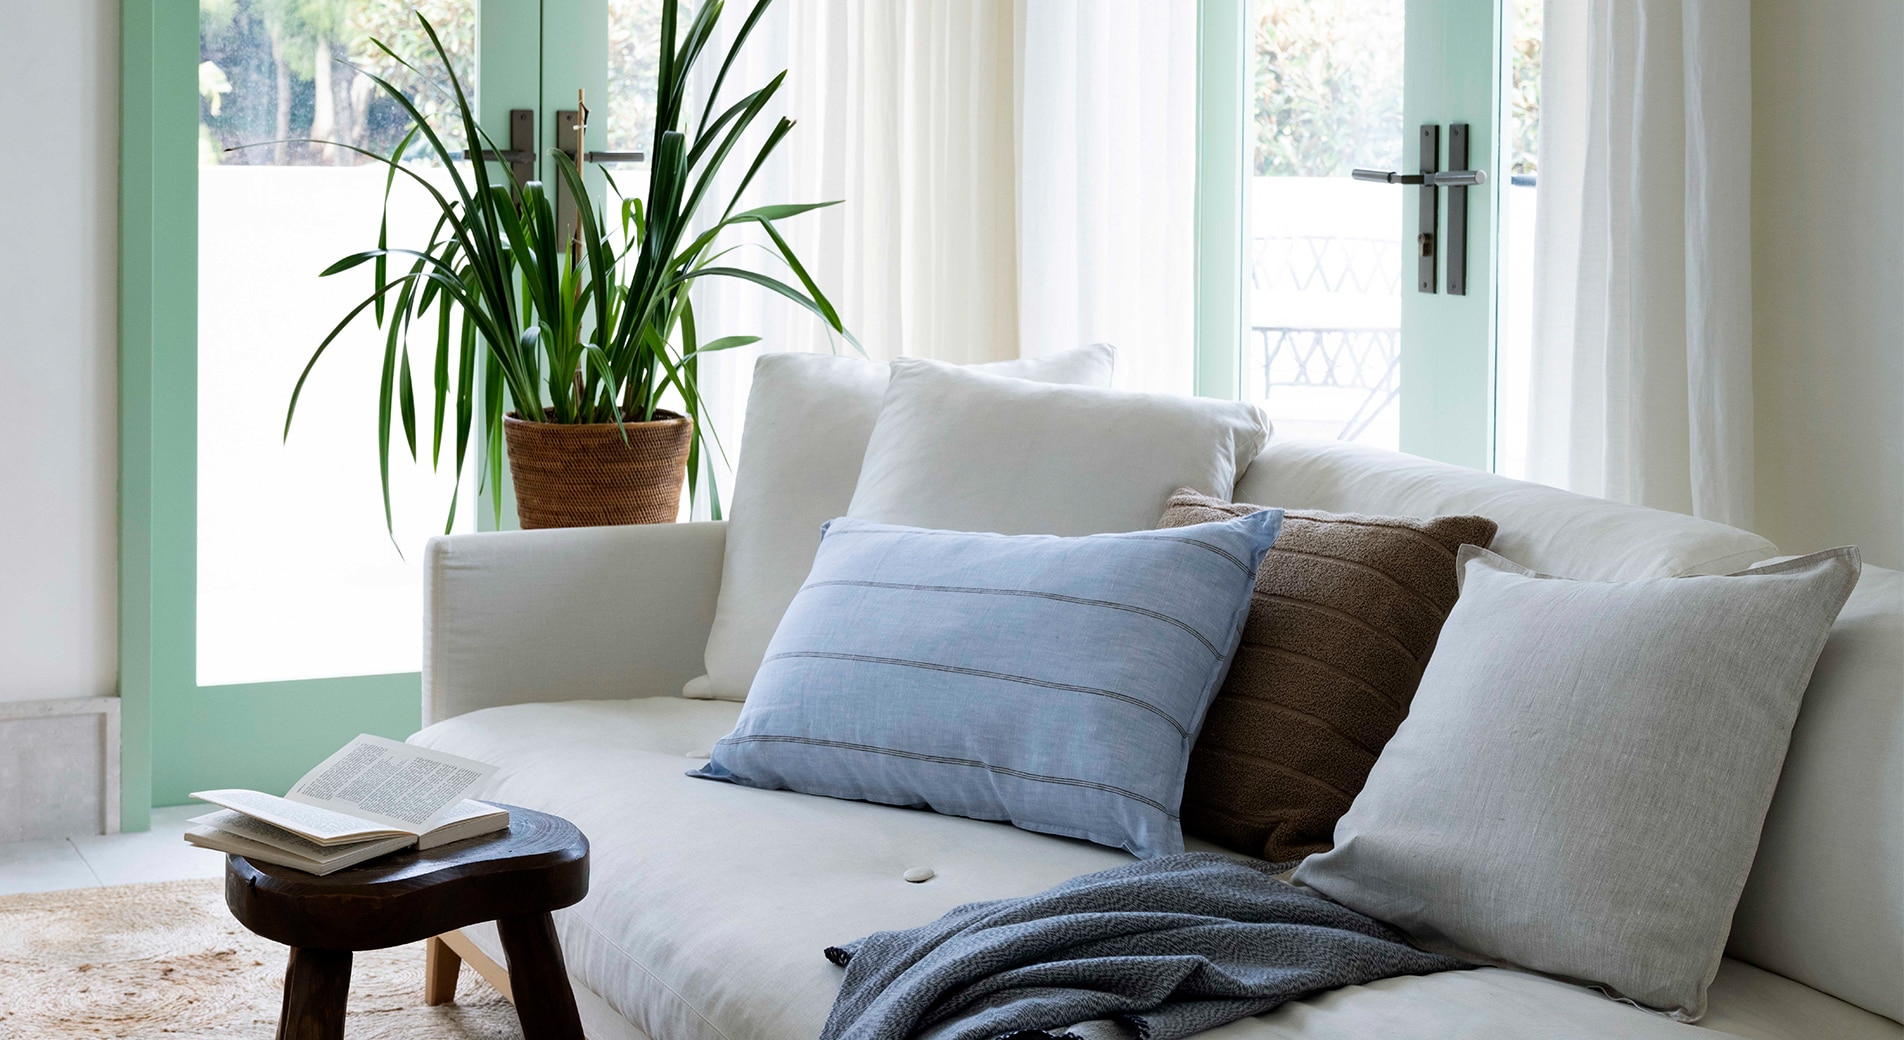 landscape shot of style living room. cream couch with blue blanket, blue striped cushion and brown and cream cushion. plant in background.